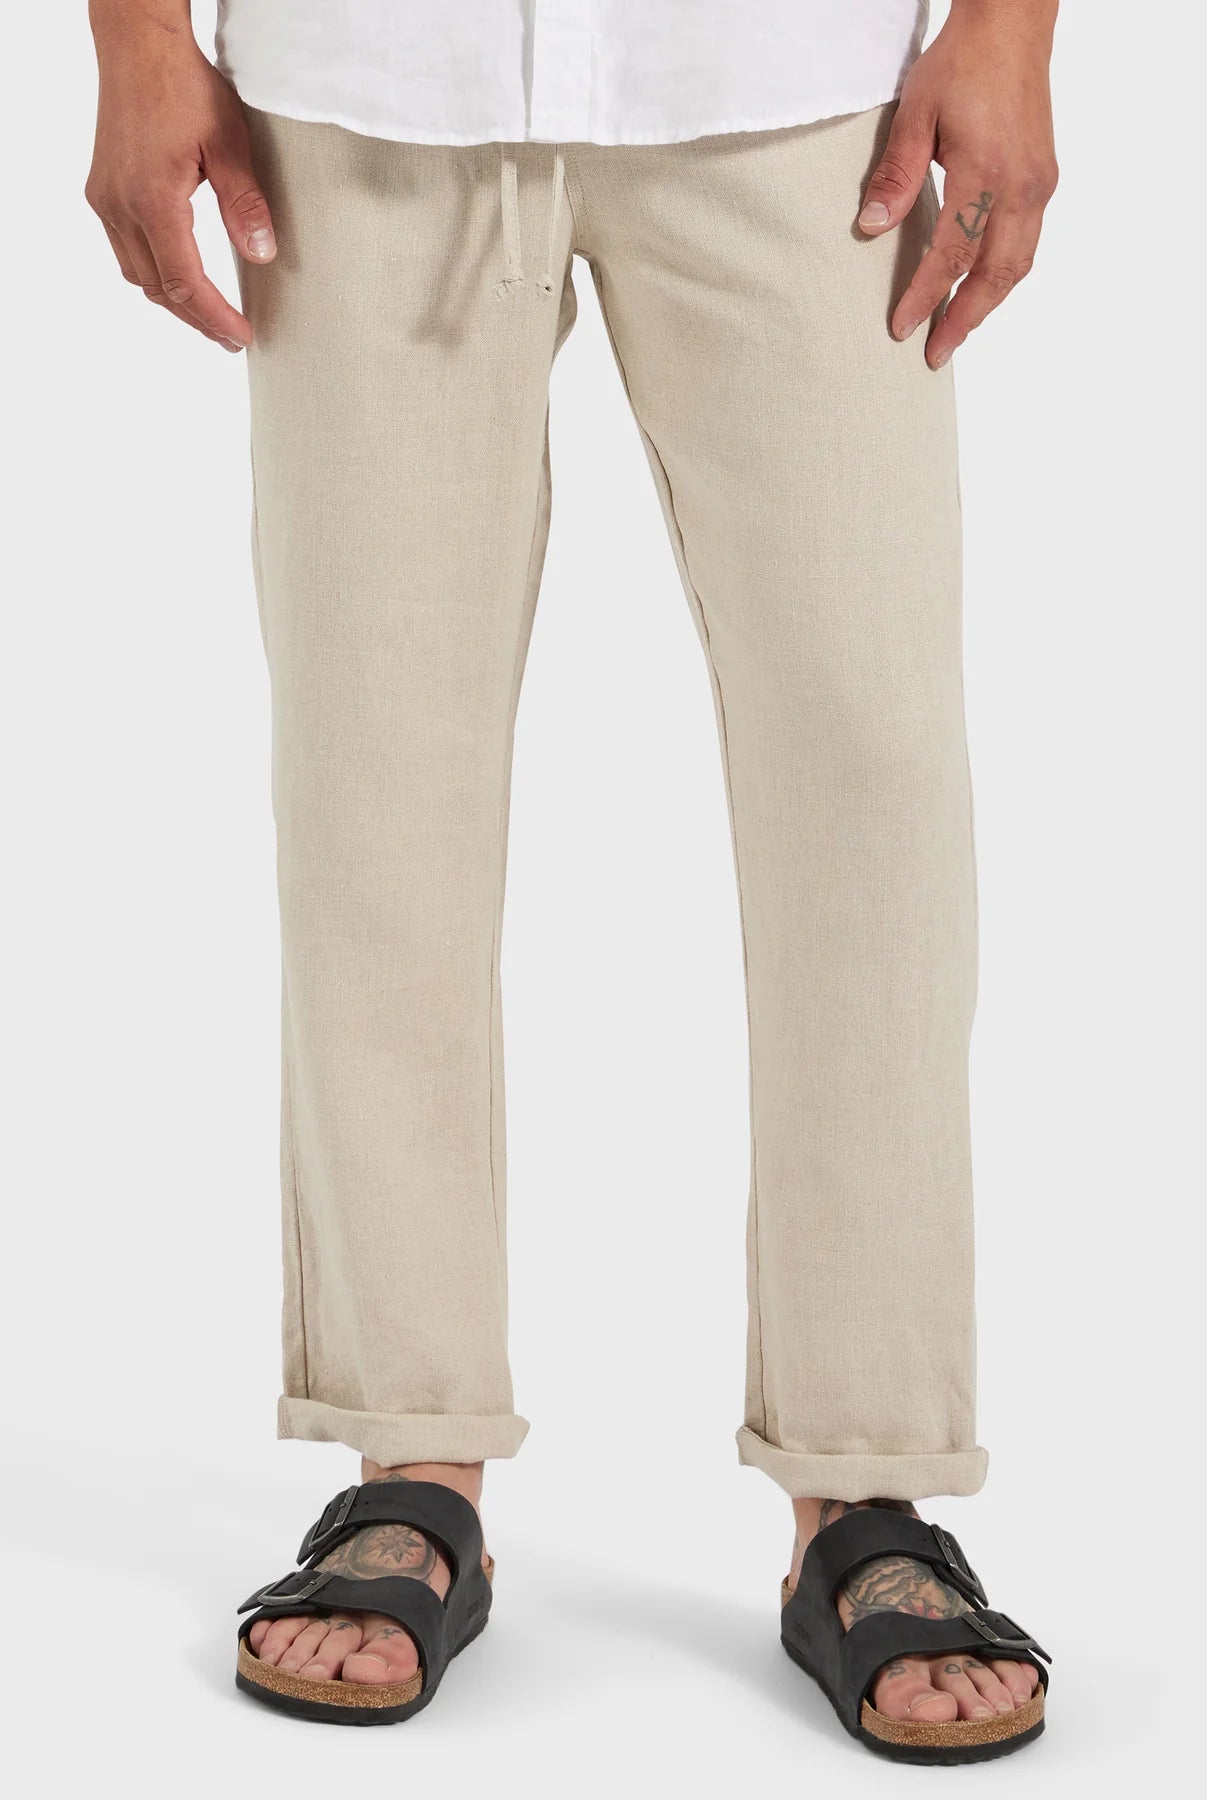 Riviera Linen Pant in Oatmeal